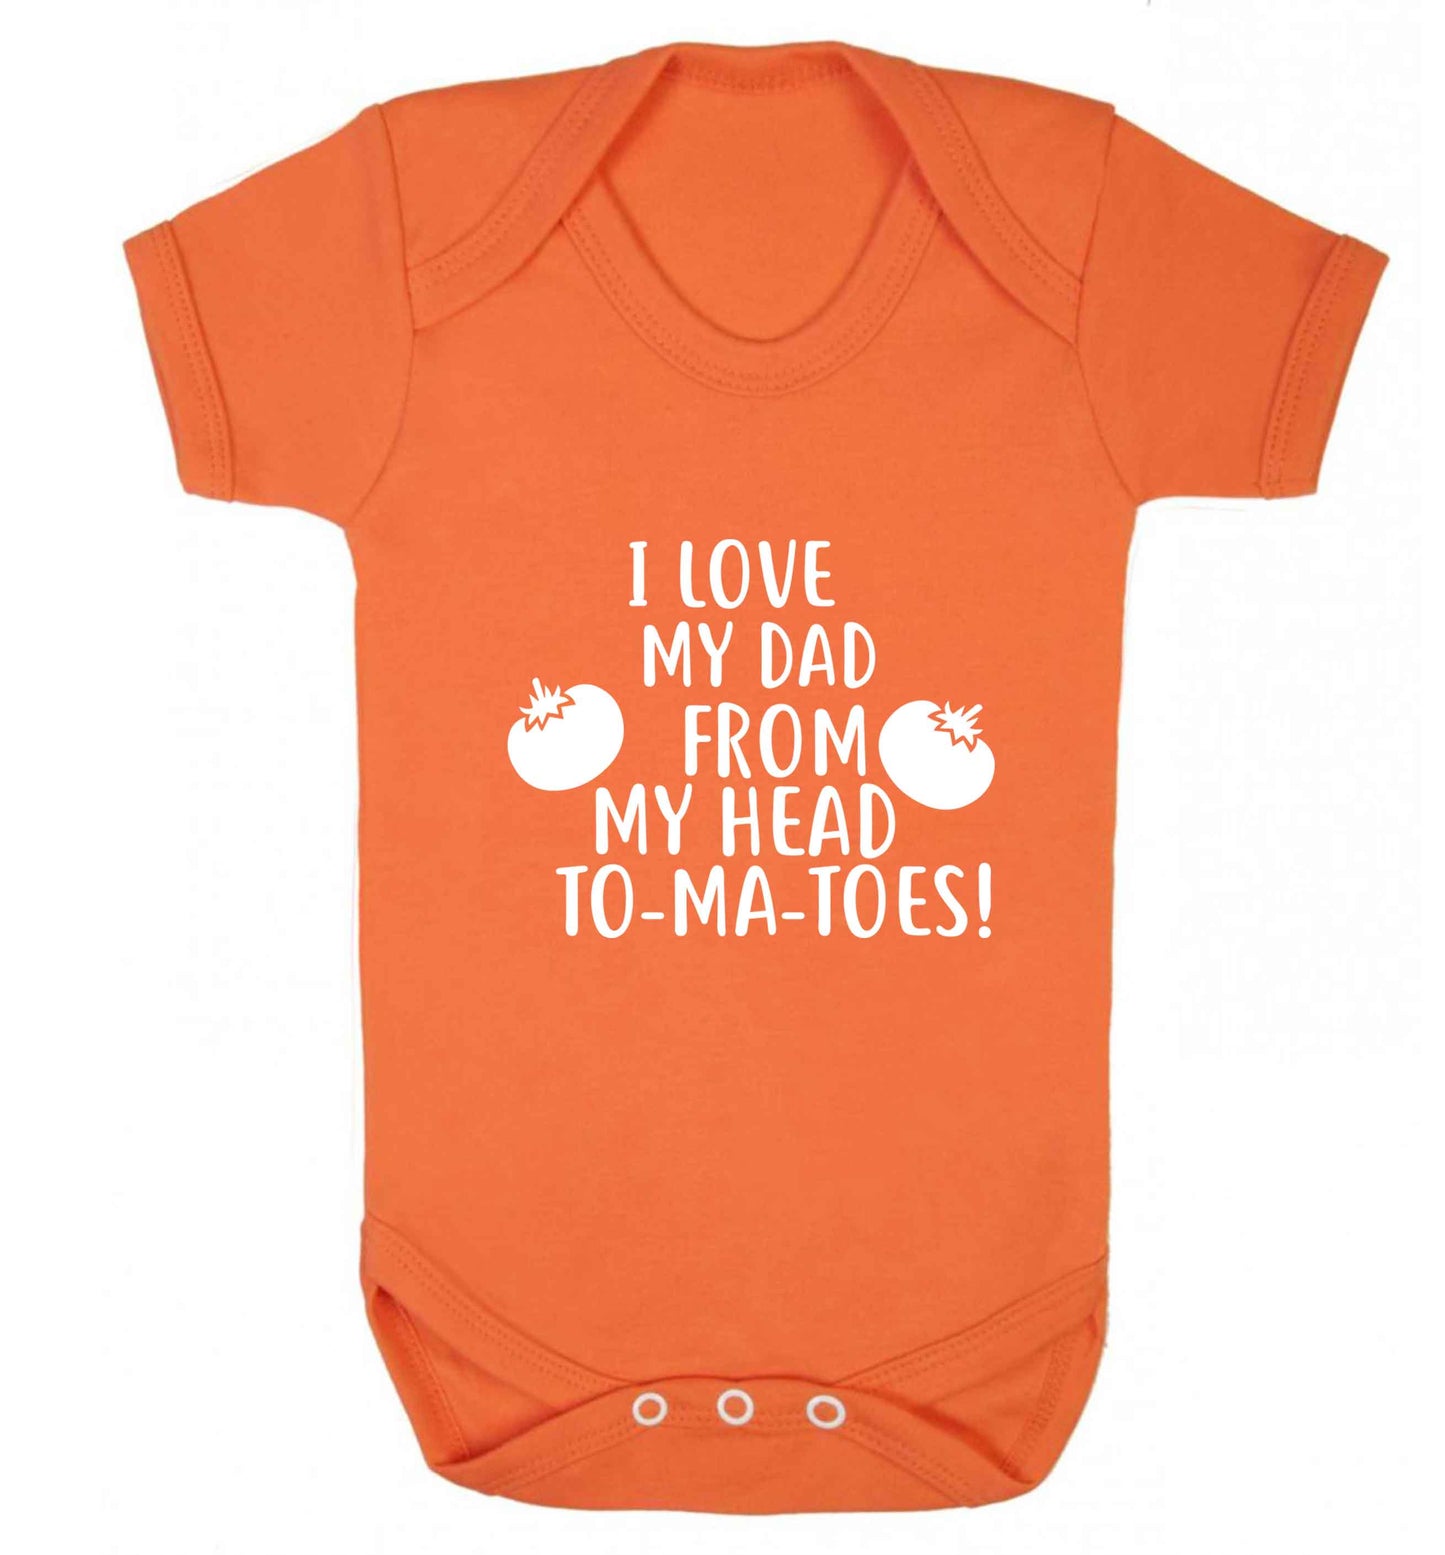 I love my dad from my head to-ma-toes baby vest orange 18-24 months